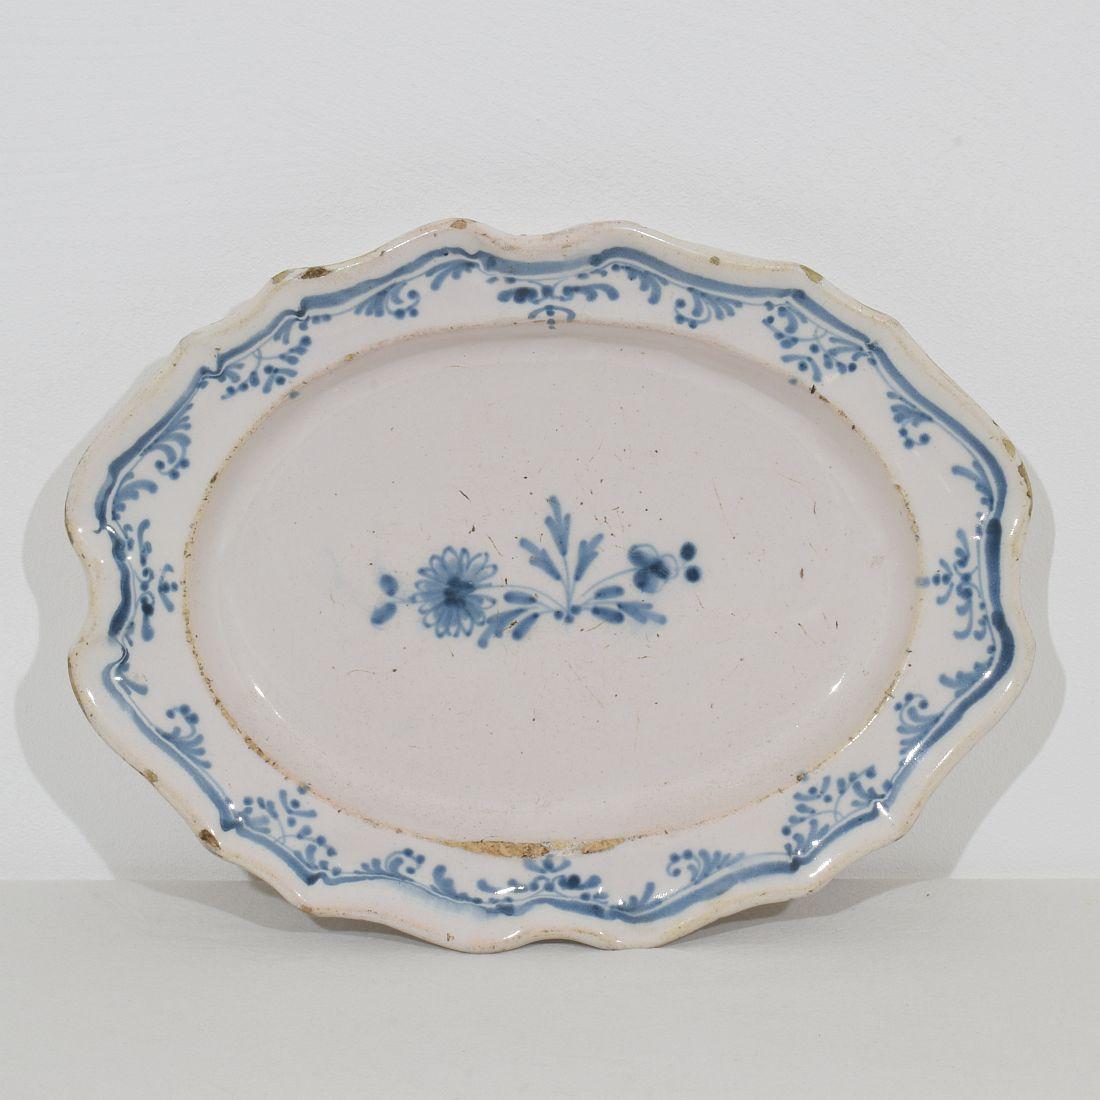 Rare Rouen plate with beautiful blue decoration.


France, circa 1750
Good condition.